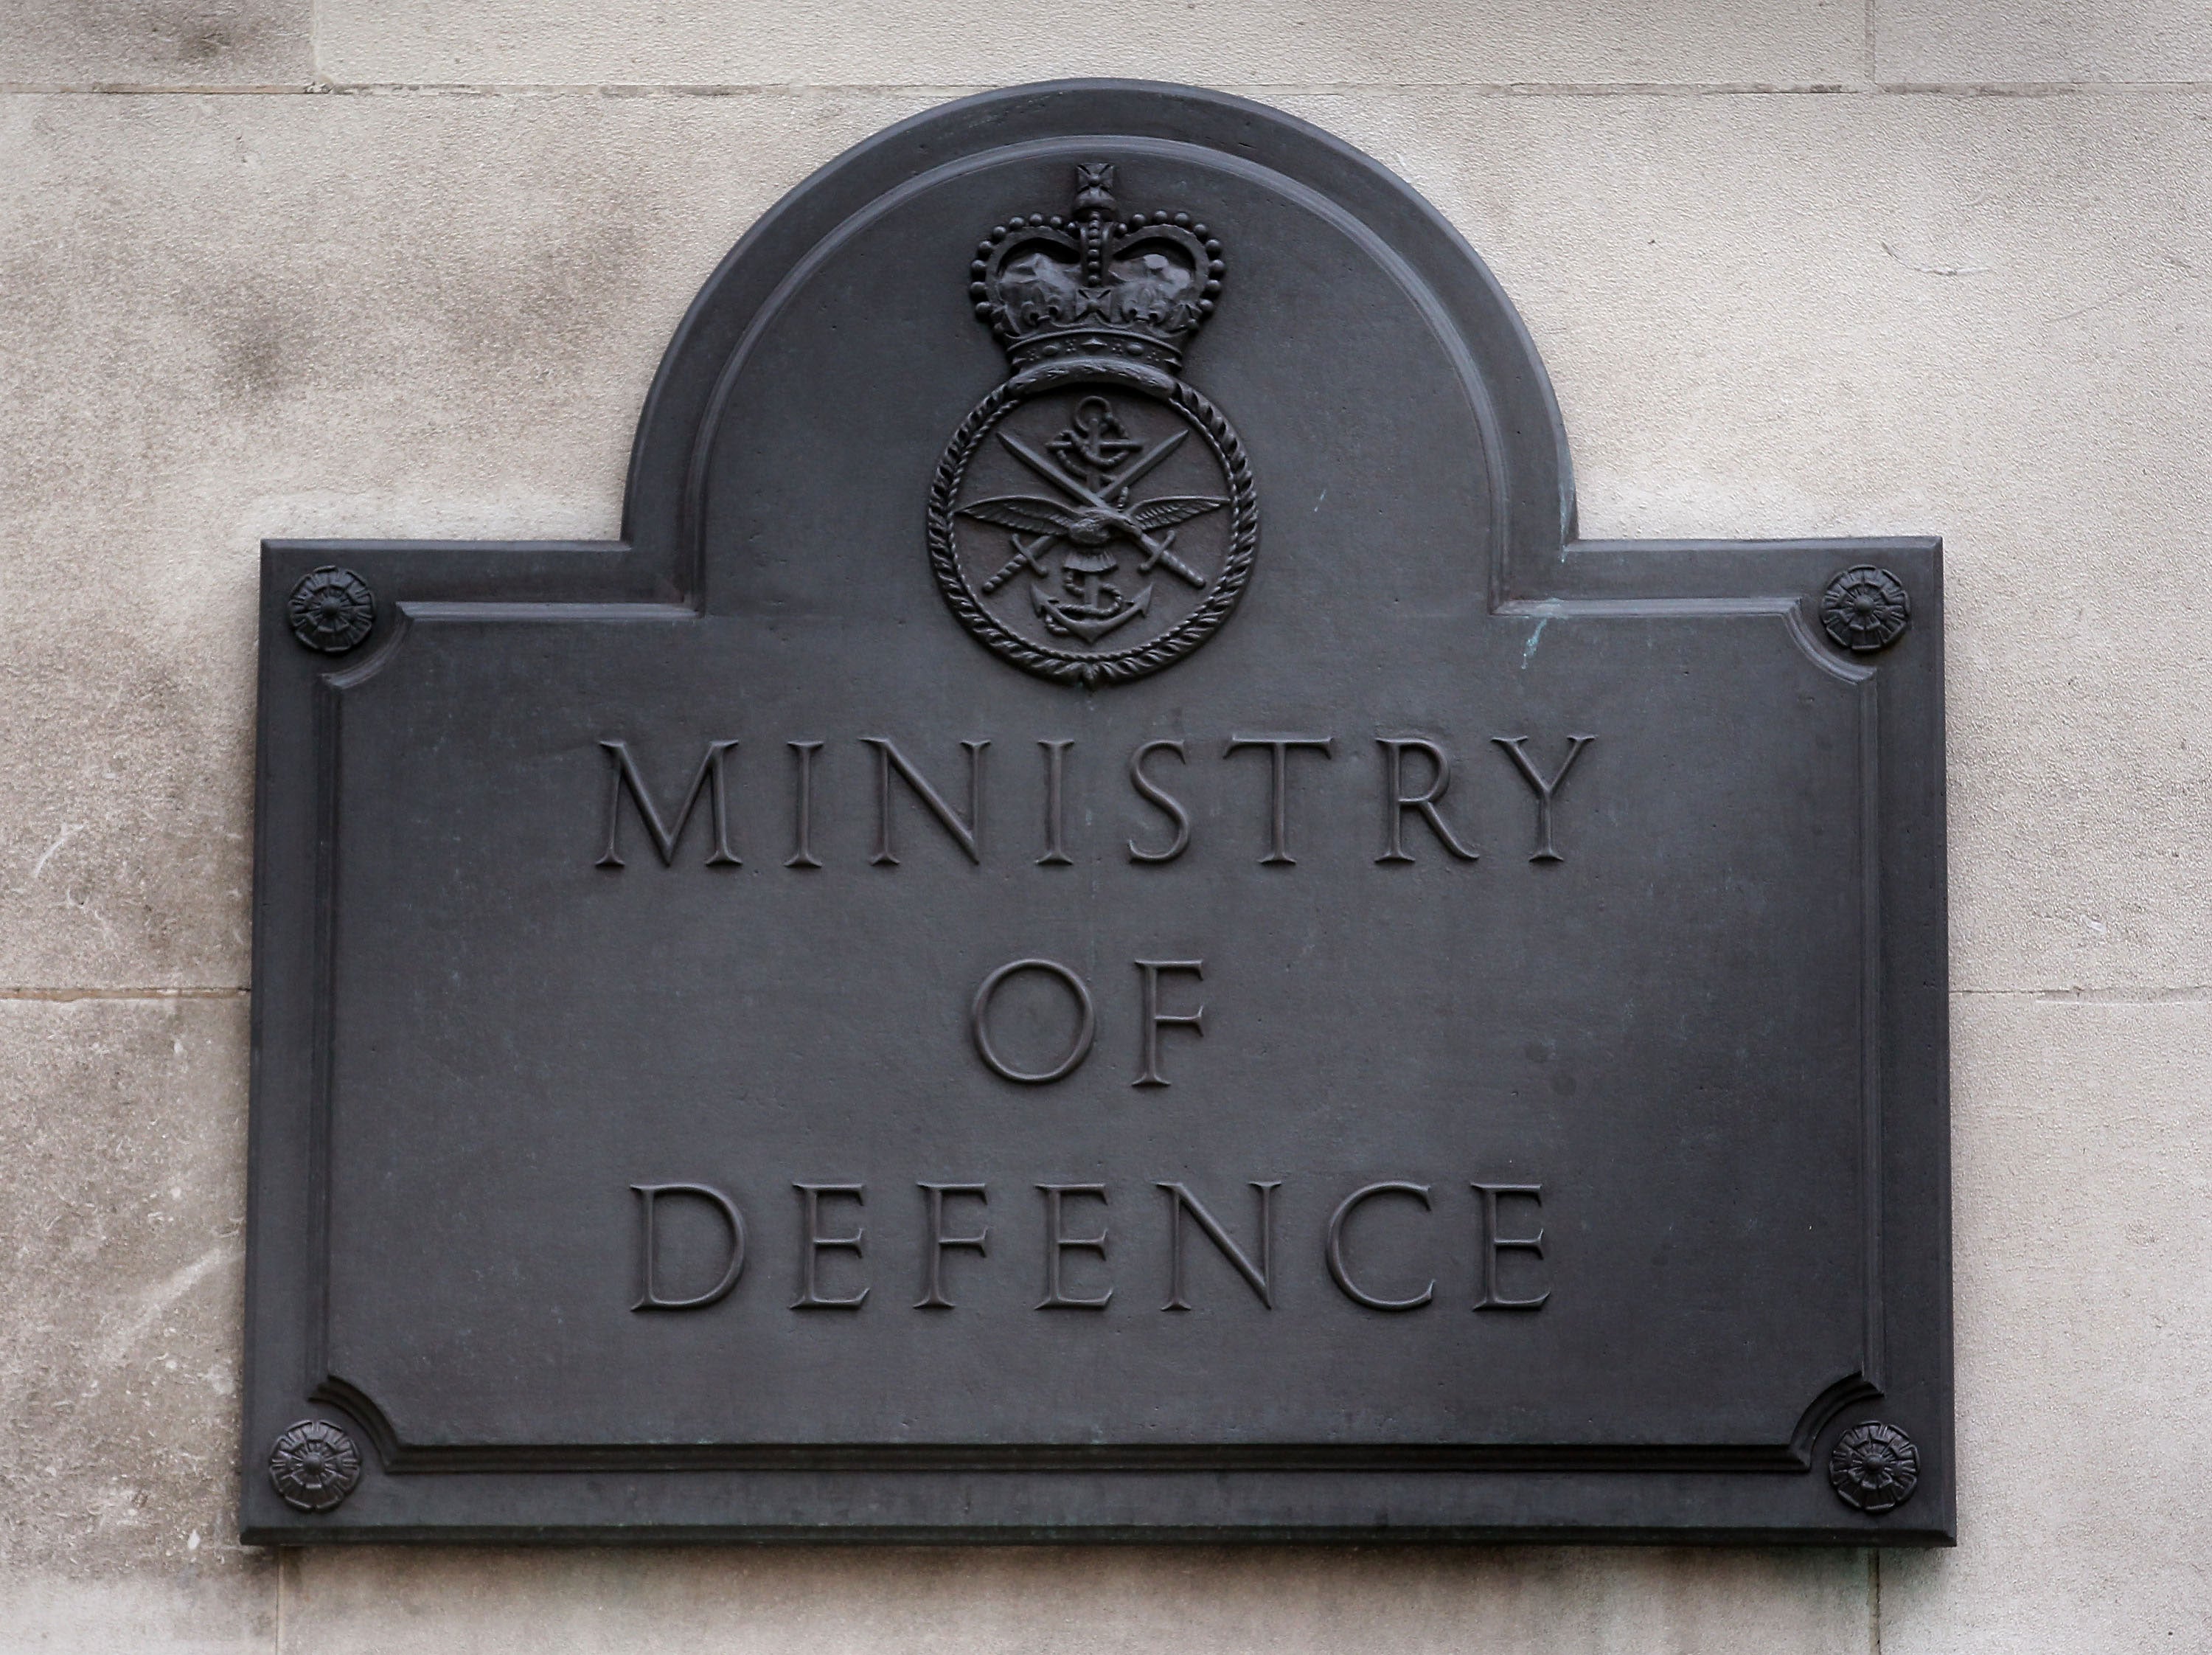 The Ministry of Defence on October 13, 2010 in London, England. Government departments are braced for budget cuts when Chancellor of the Exchequer George Osborne delivers the Comprehensive Spending Review on October 20, 2010.